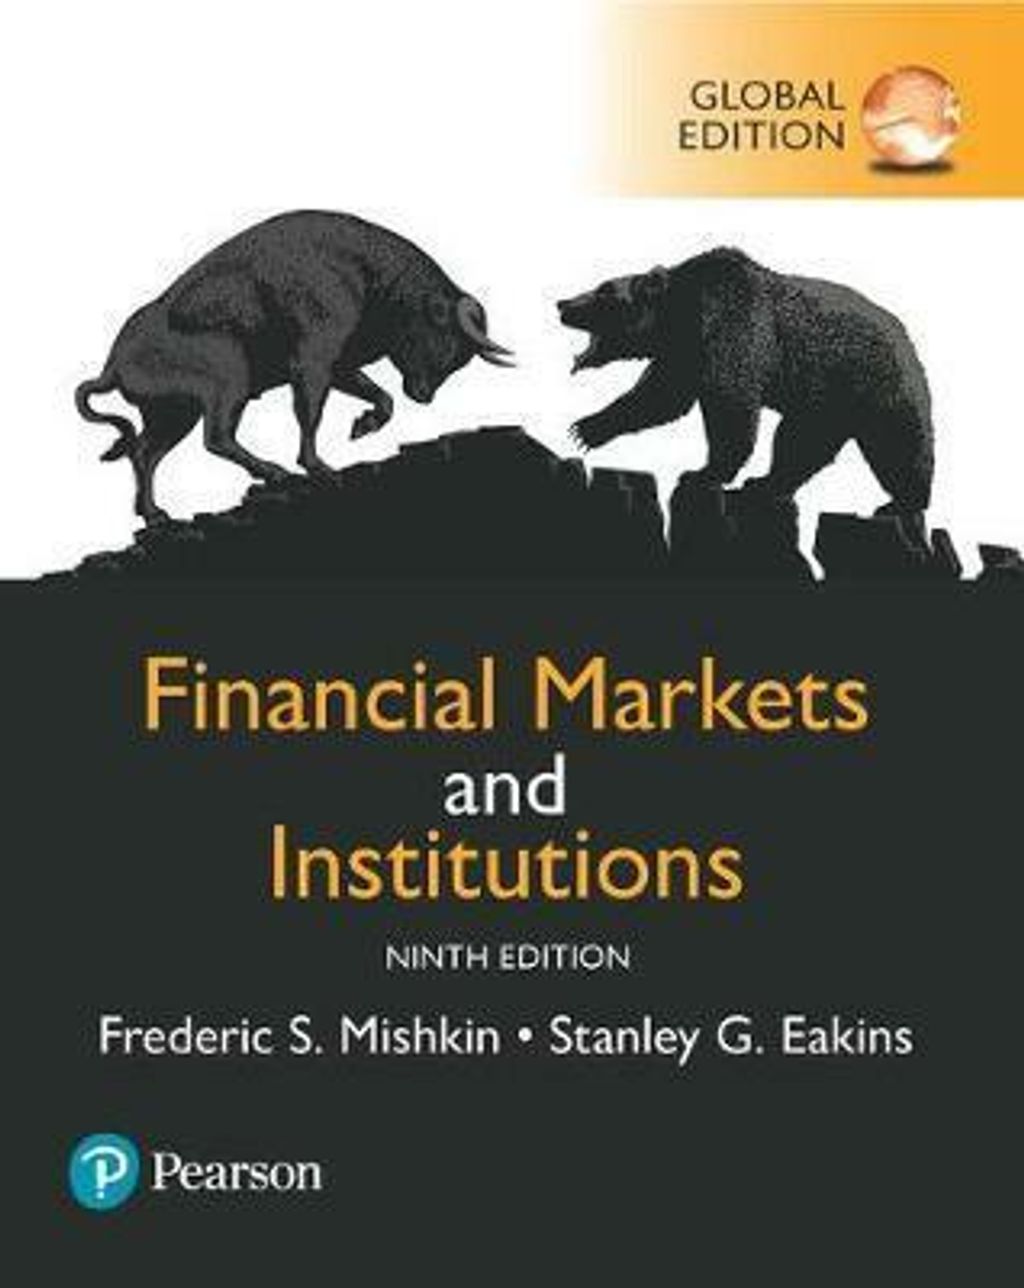 9781292215006 Financial Markets and Institutions Miskin 9E GE.jpg